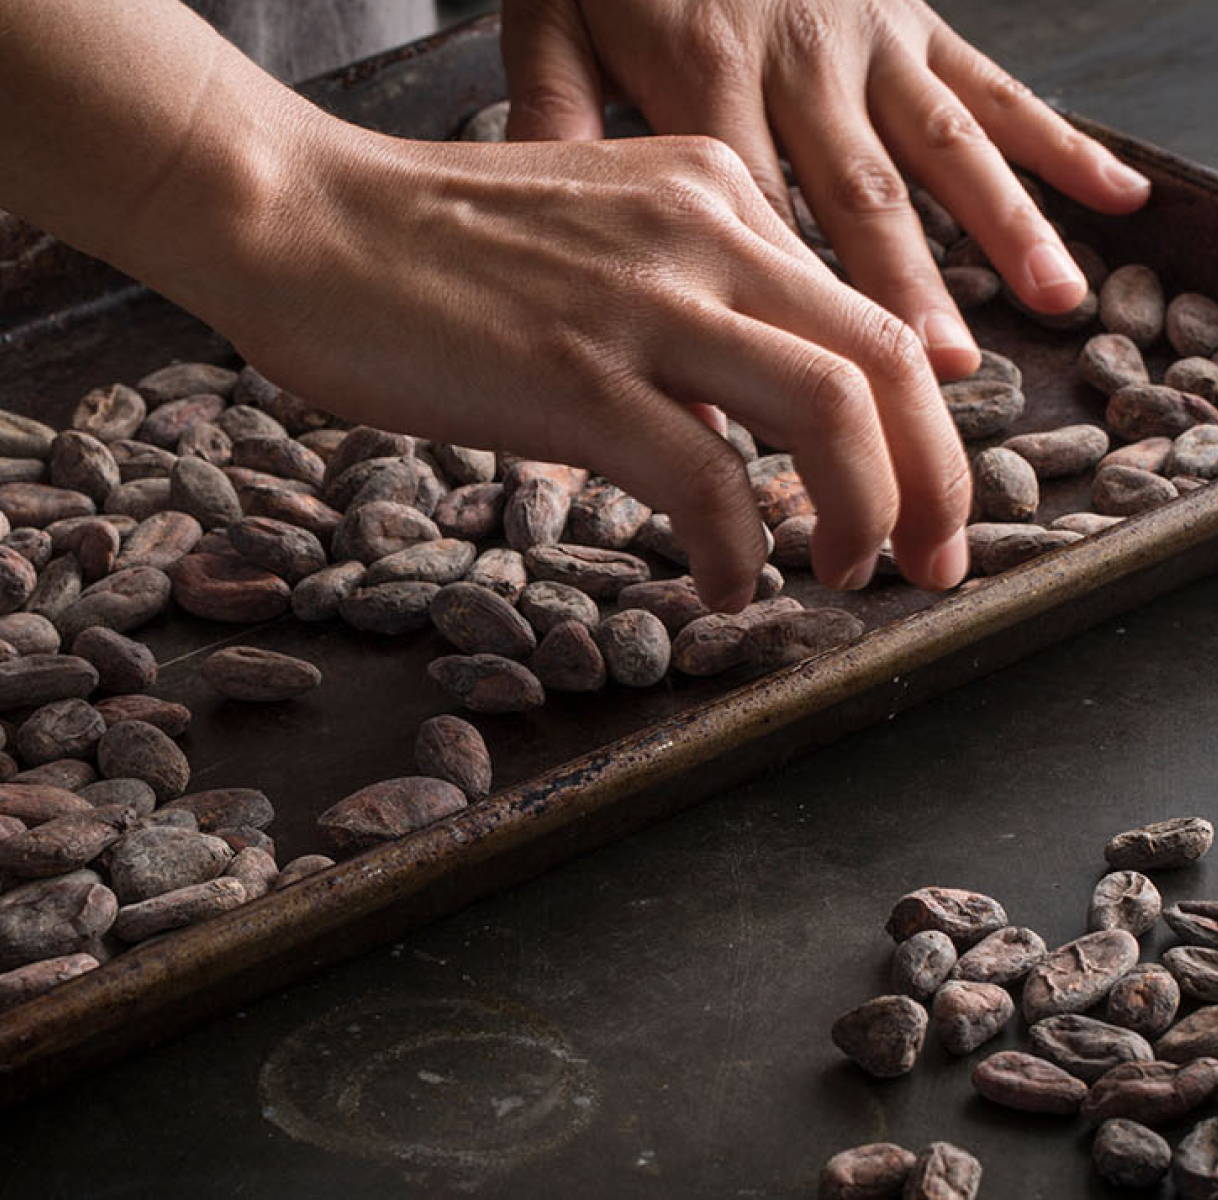 Hands sorting through cocoa beans